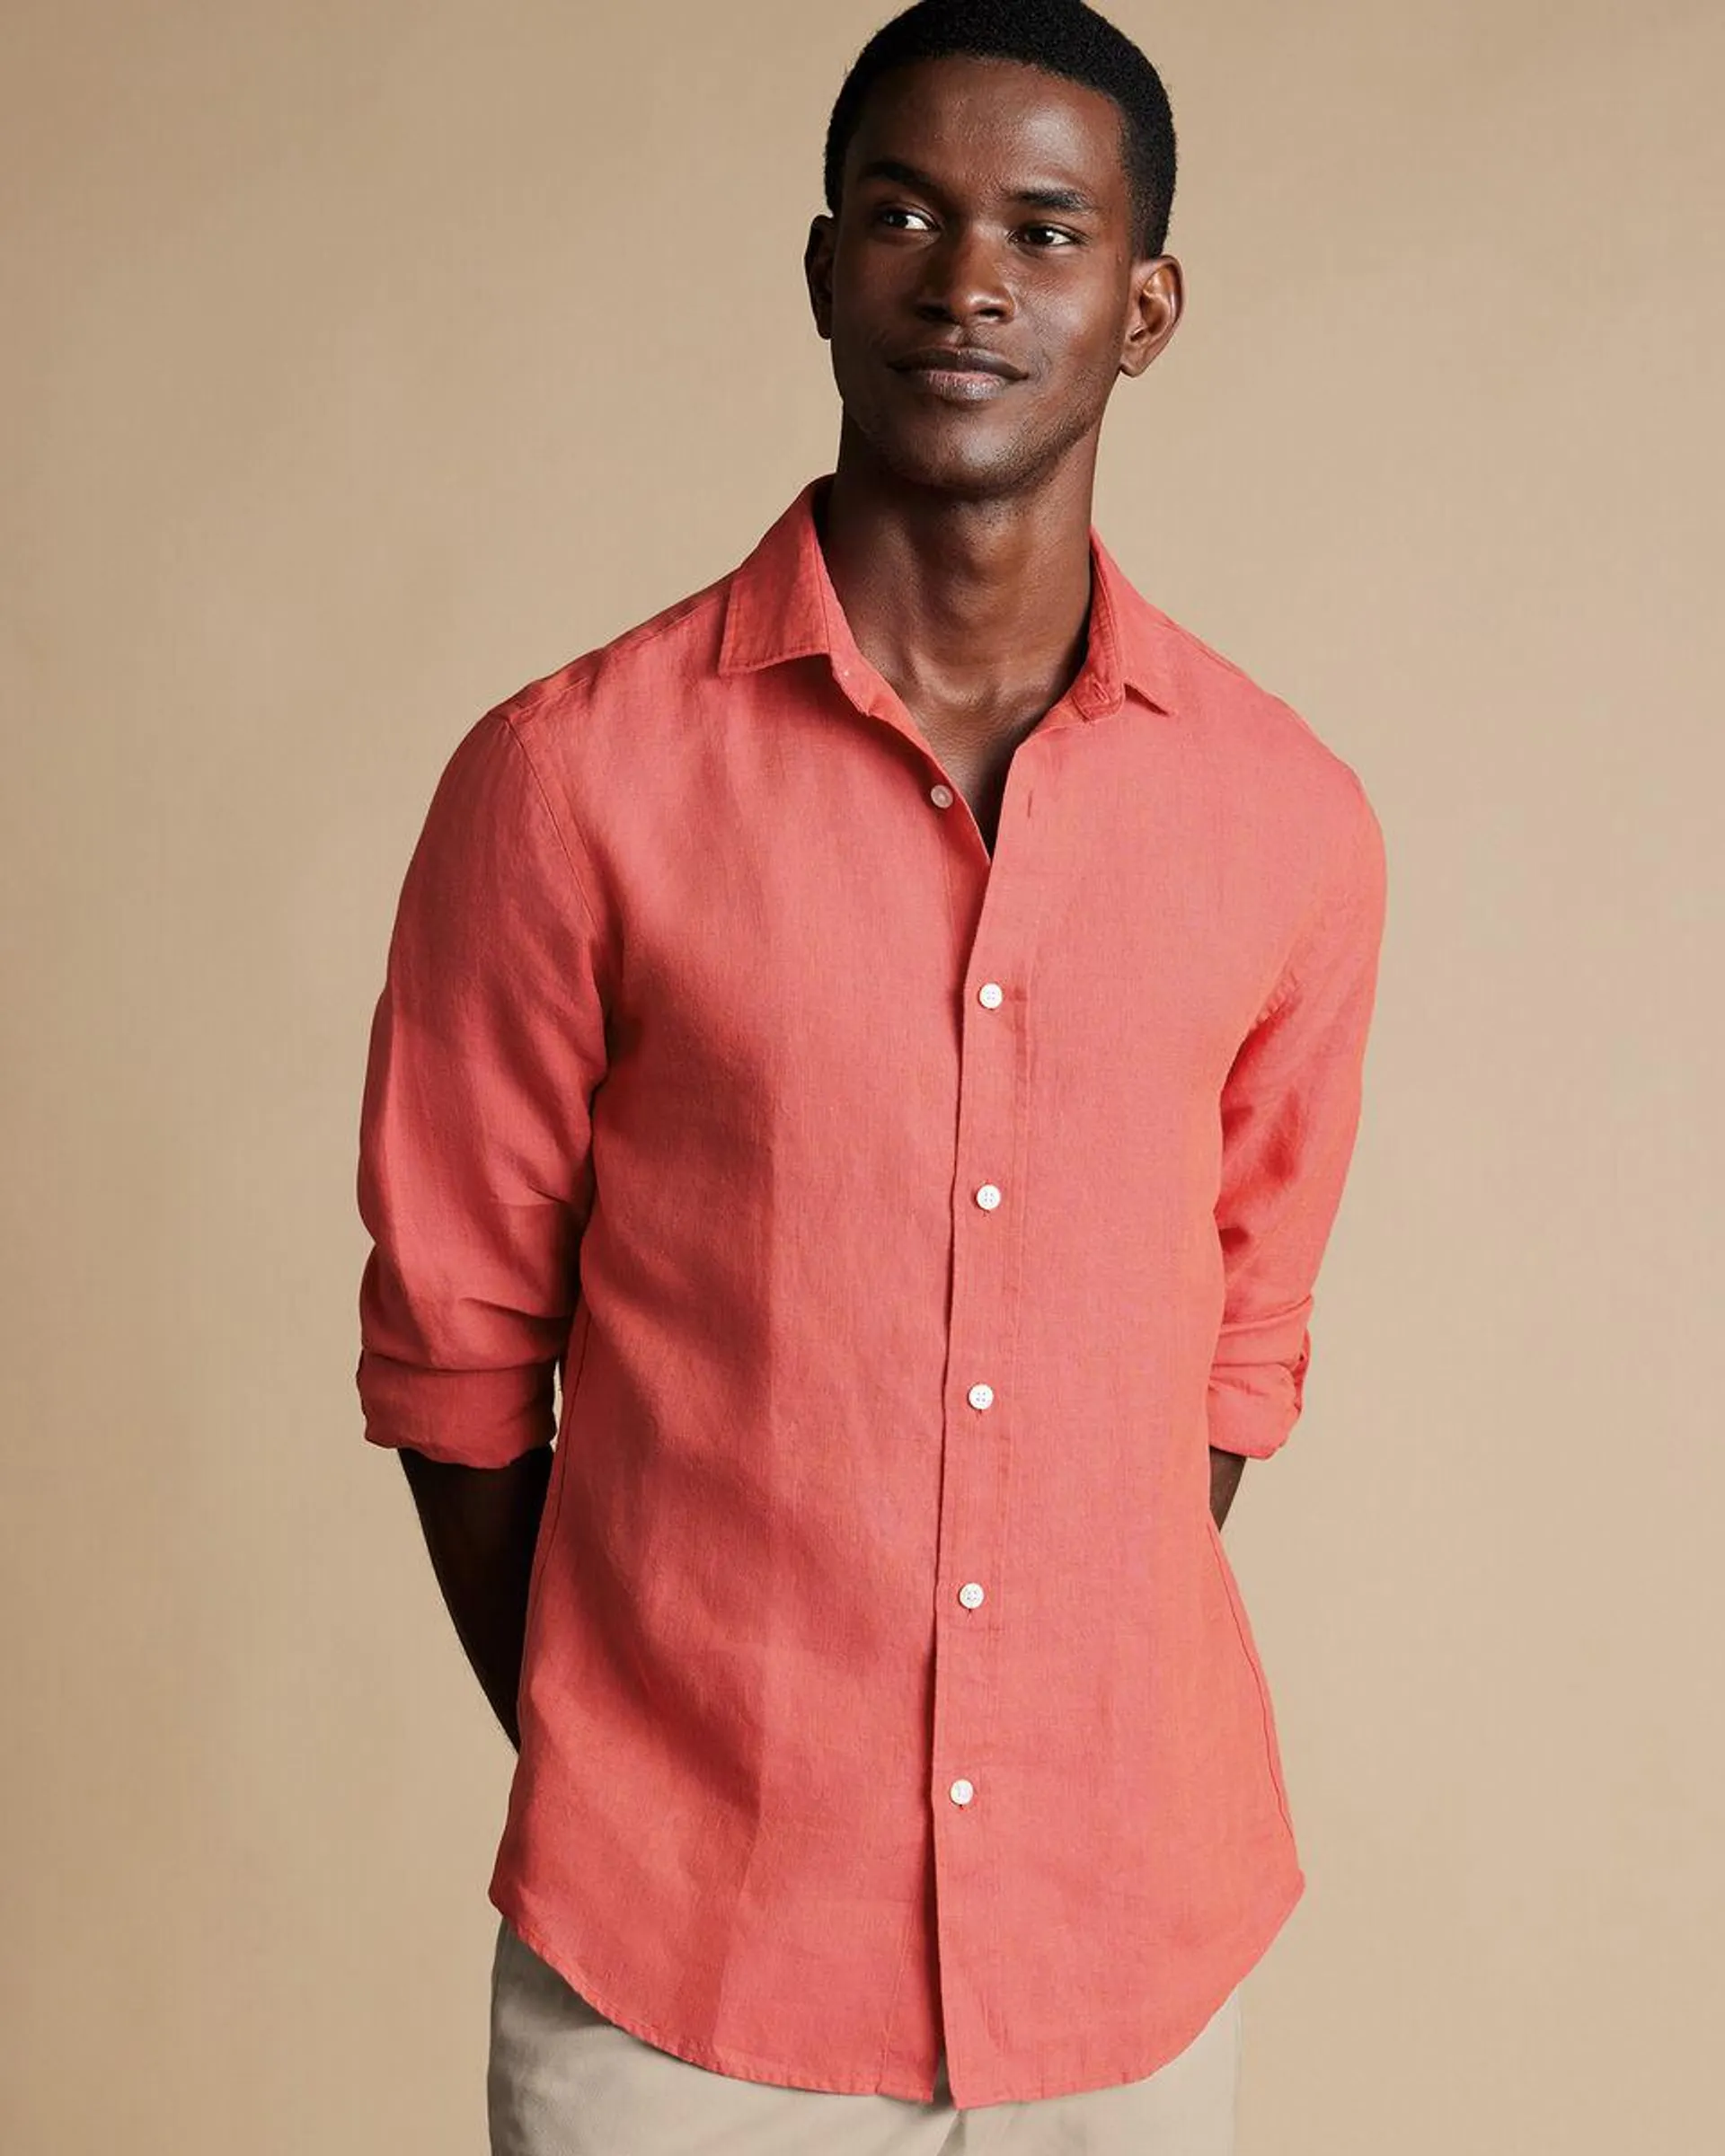 details about product: Pure Linen Shirt - Coral Pink